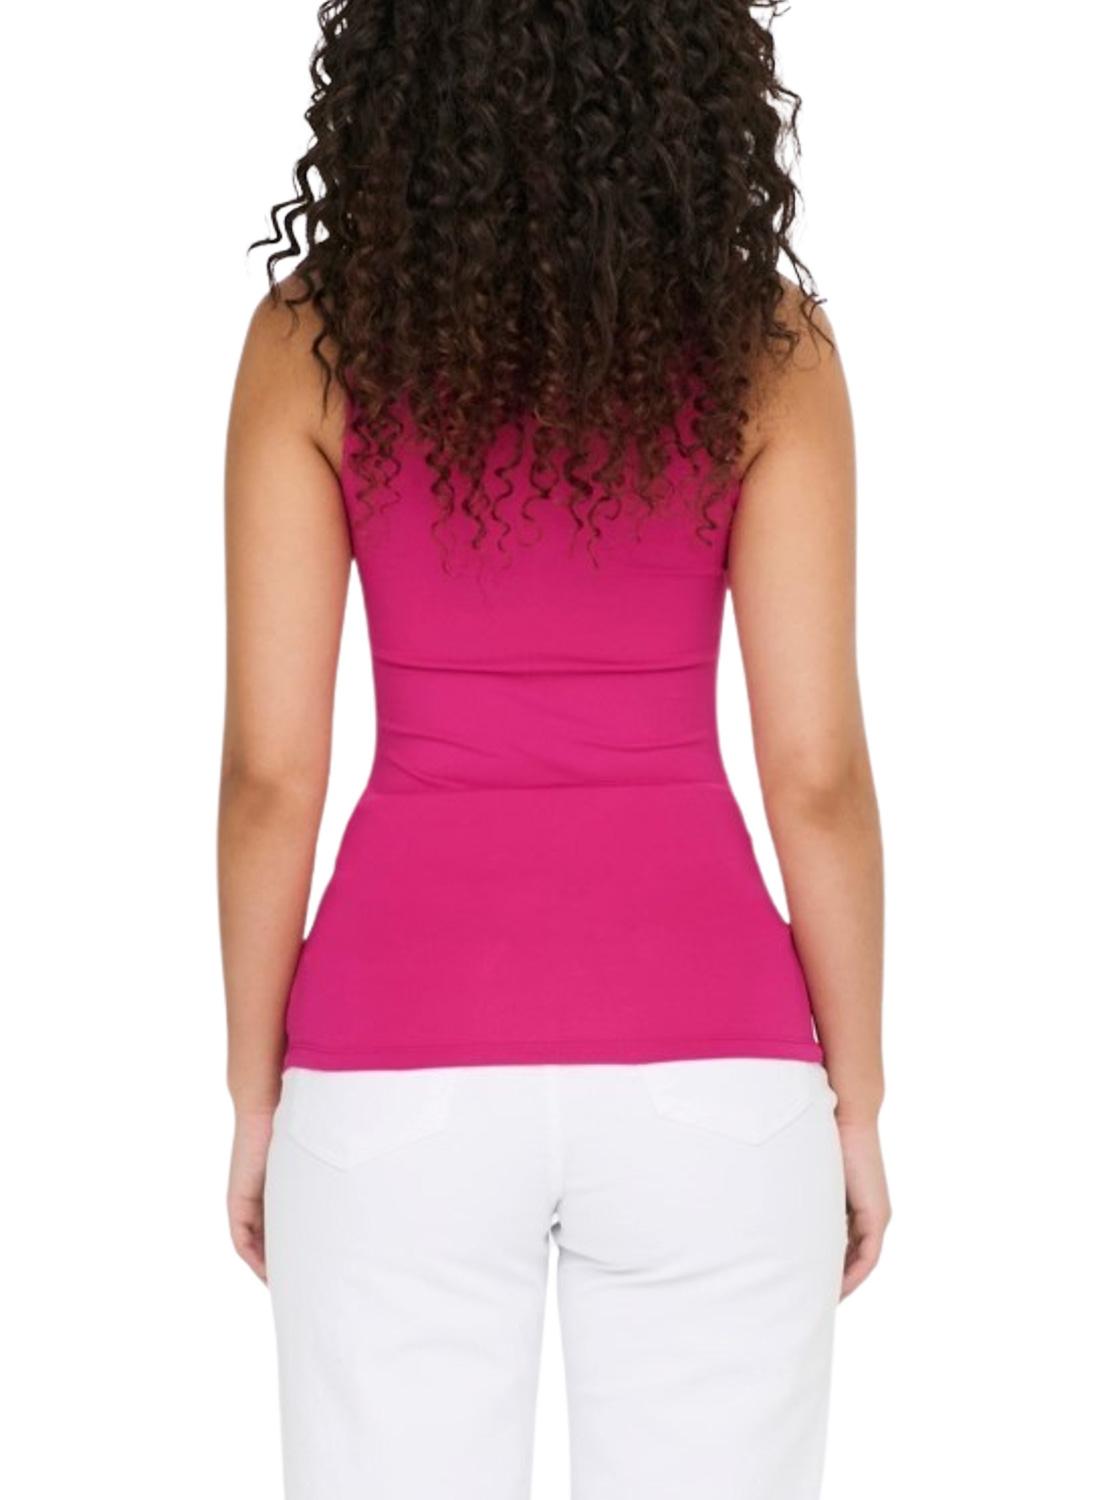 Top Only Lea Basic Rosa per Donna